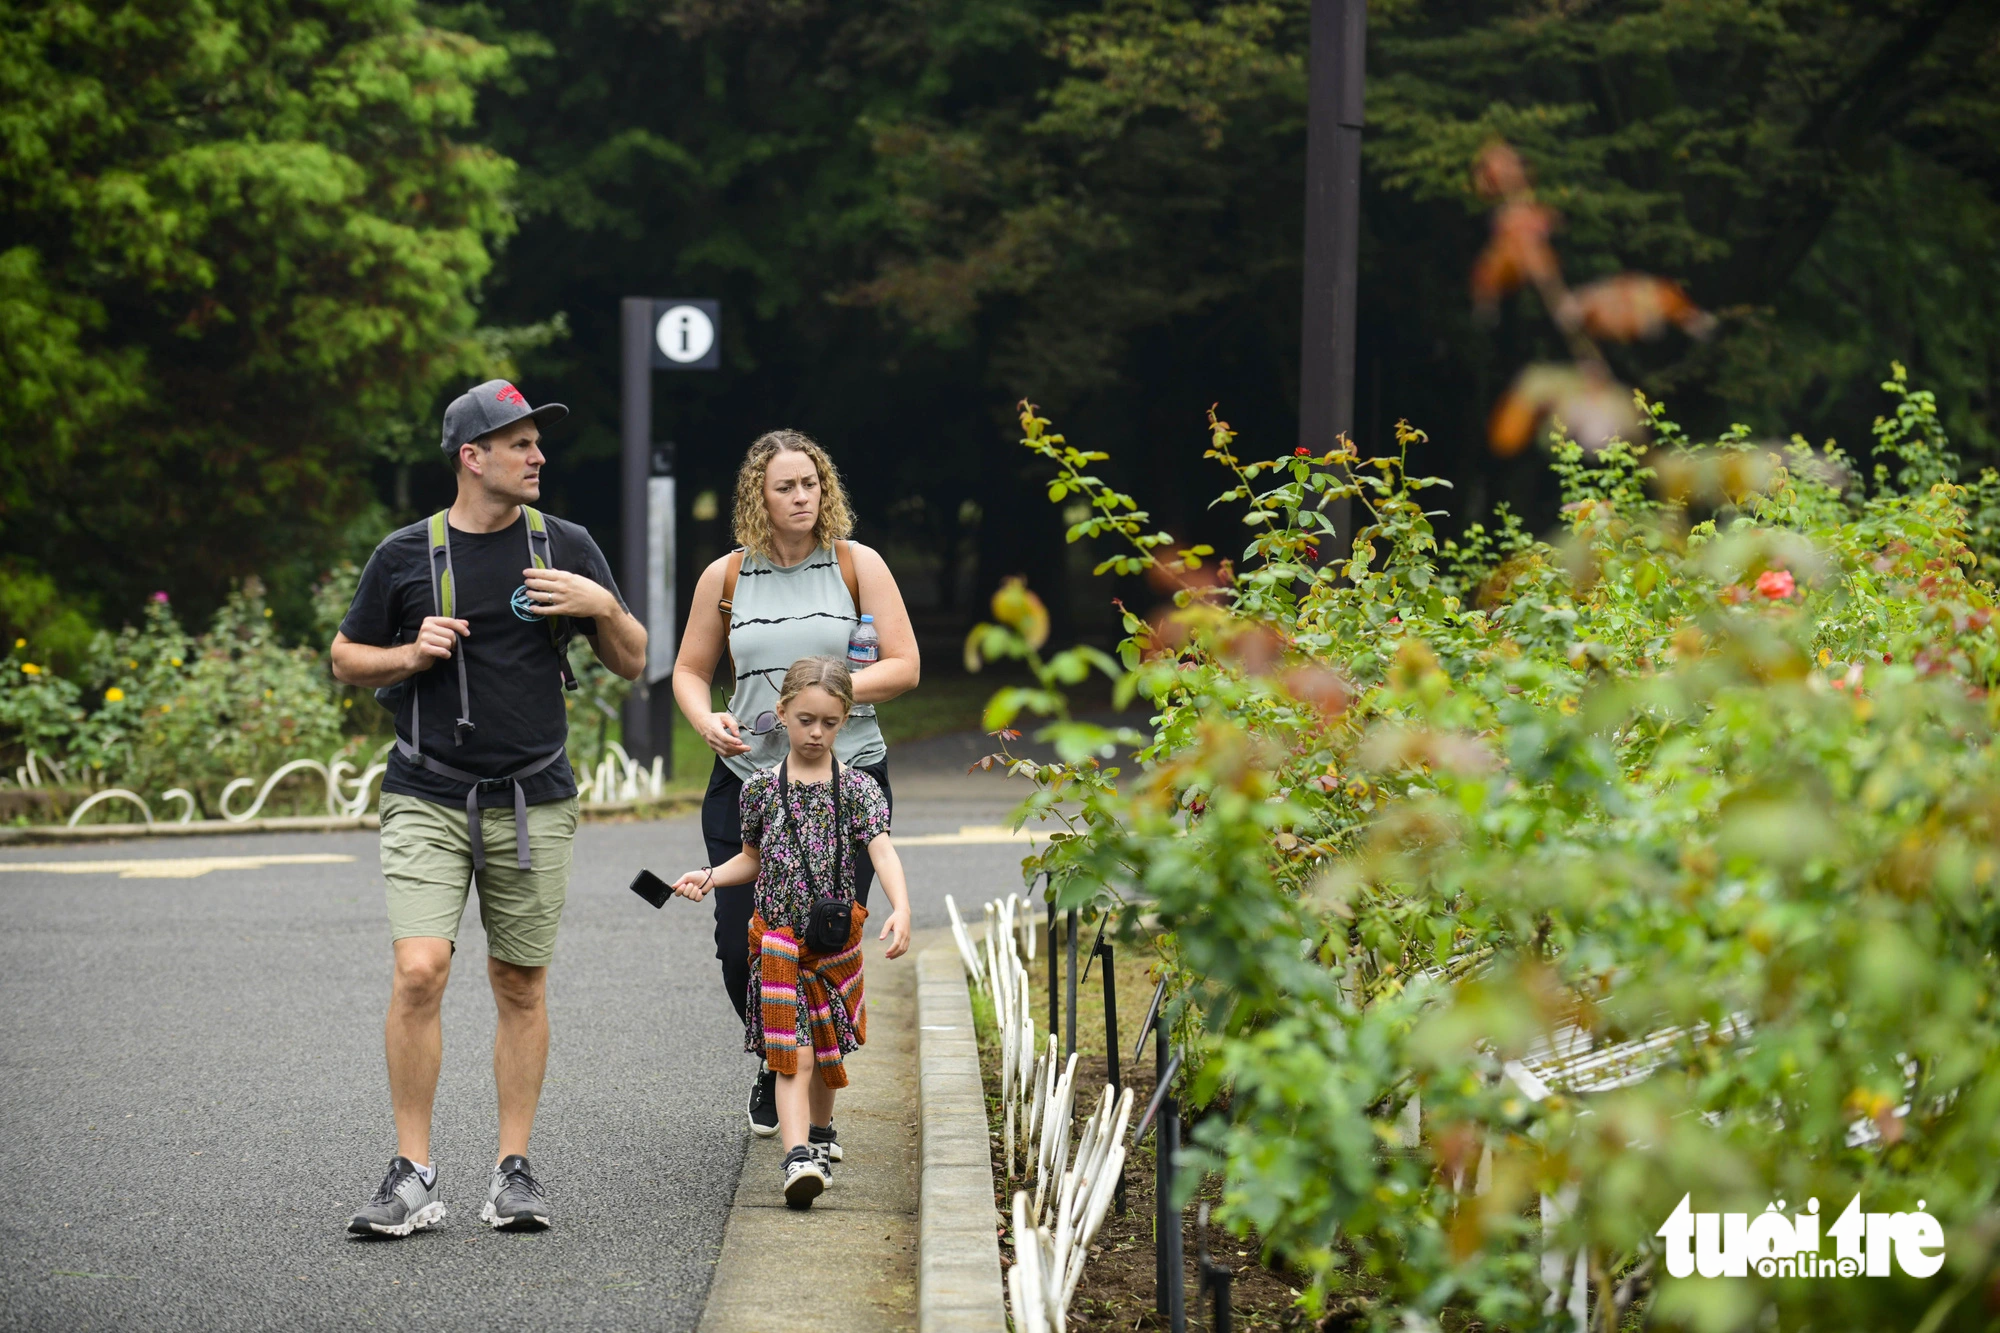 The Yoyogi Park daily welcomes a high number of local and foreign visitors to explore the ‘green lung’ of Tokyo